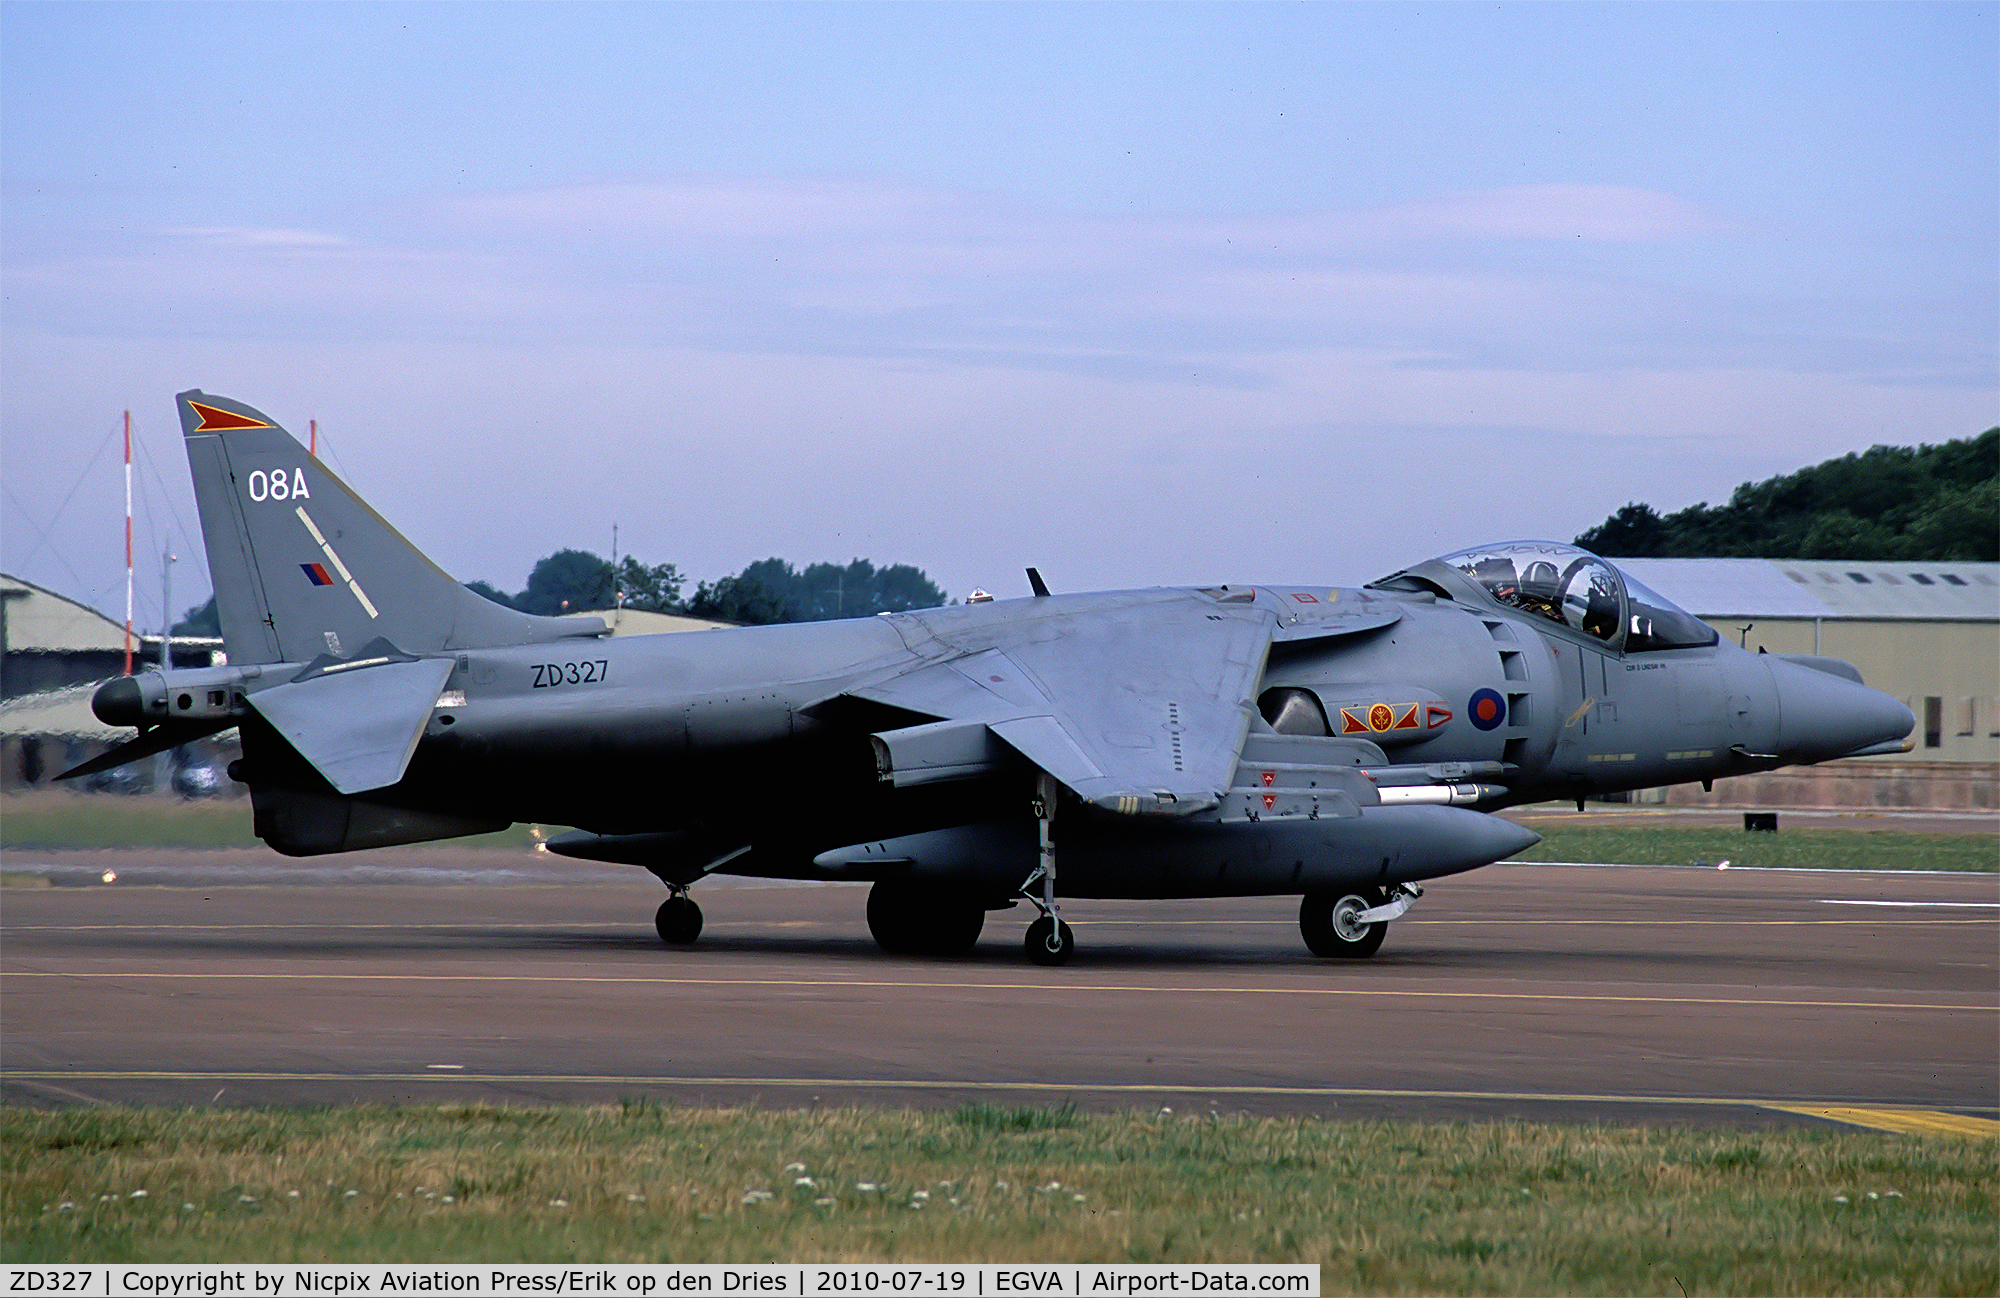 ZD327, British Aerospace Harrier GR.9A C/N 512115/P8, ZD-327 is a Harrier GR.9A and is seen here assigned to 899 Naval Air Sqaudron at the RIAT-2010.